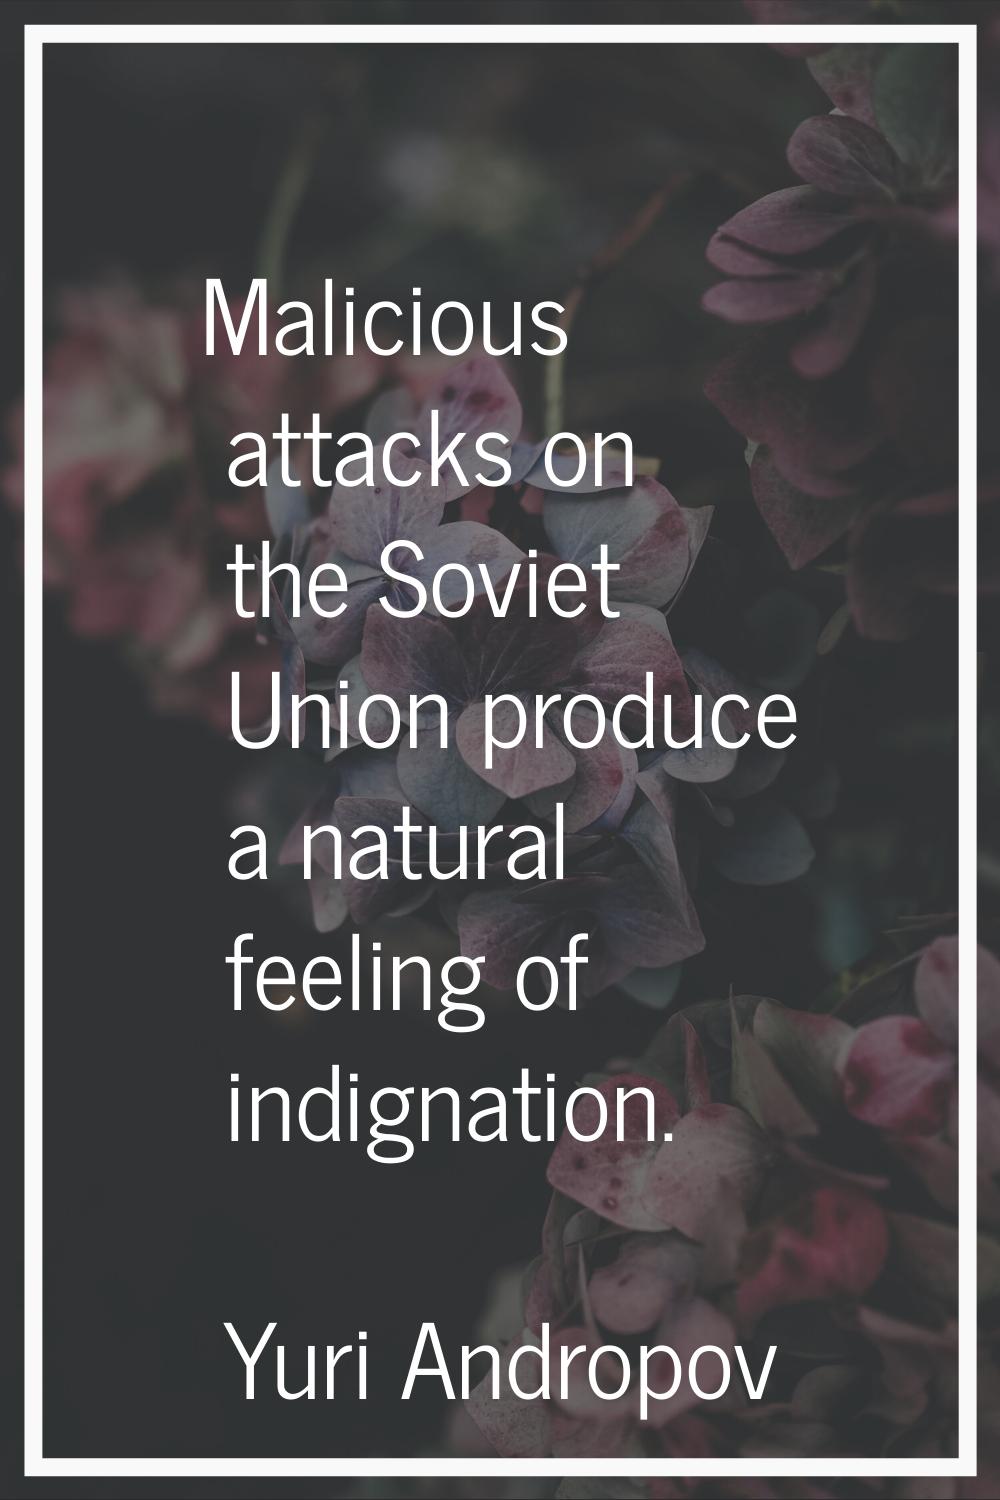 Malicious attacks on the Soviet Union produce a natural feeling of indignation.